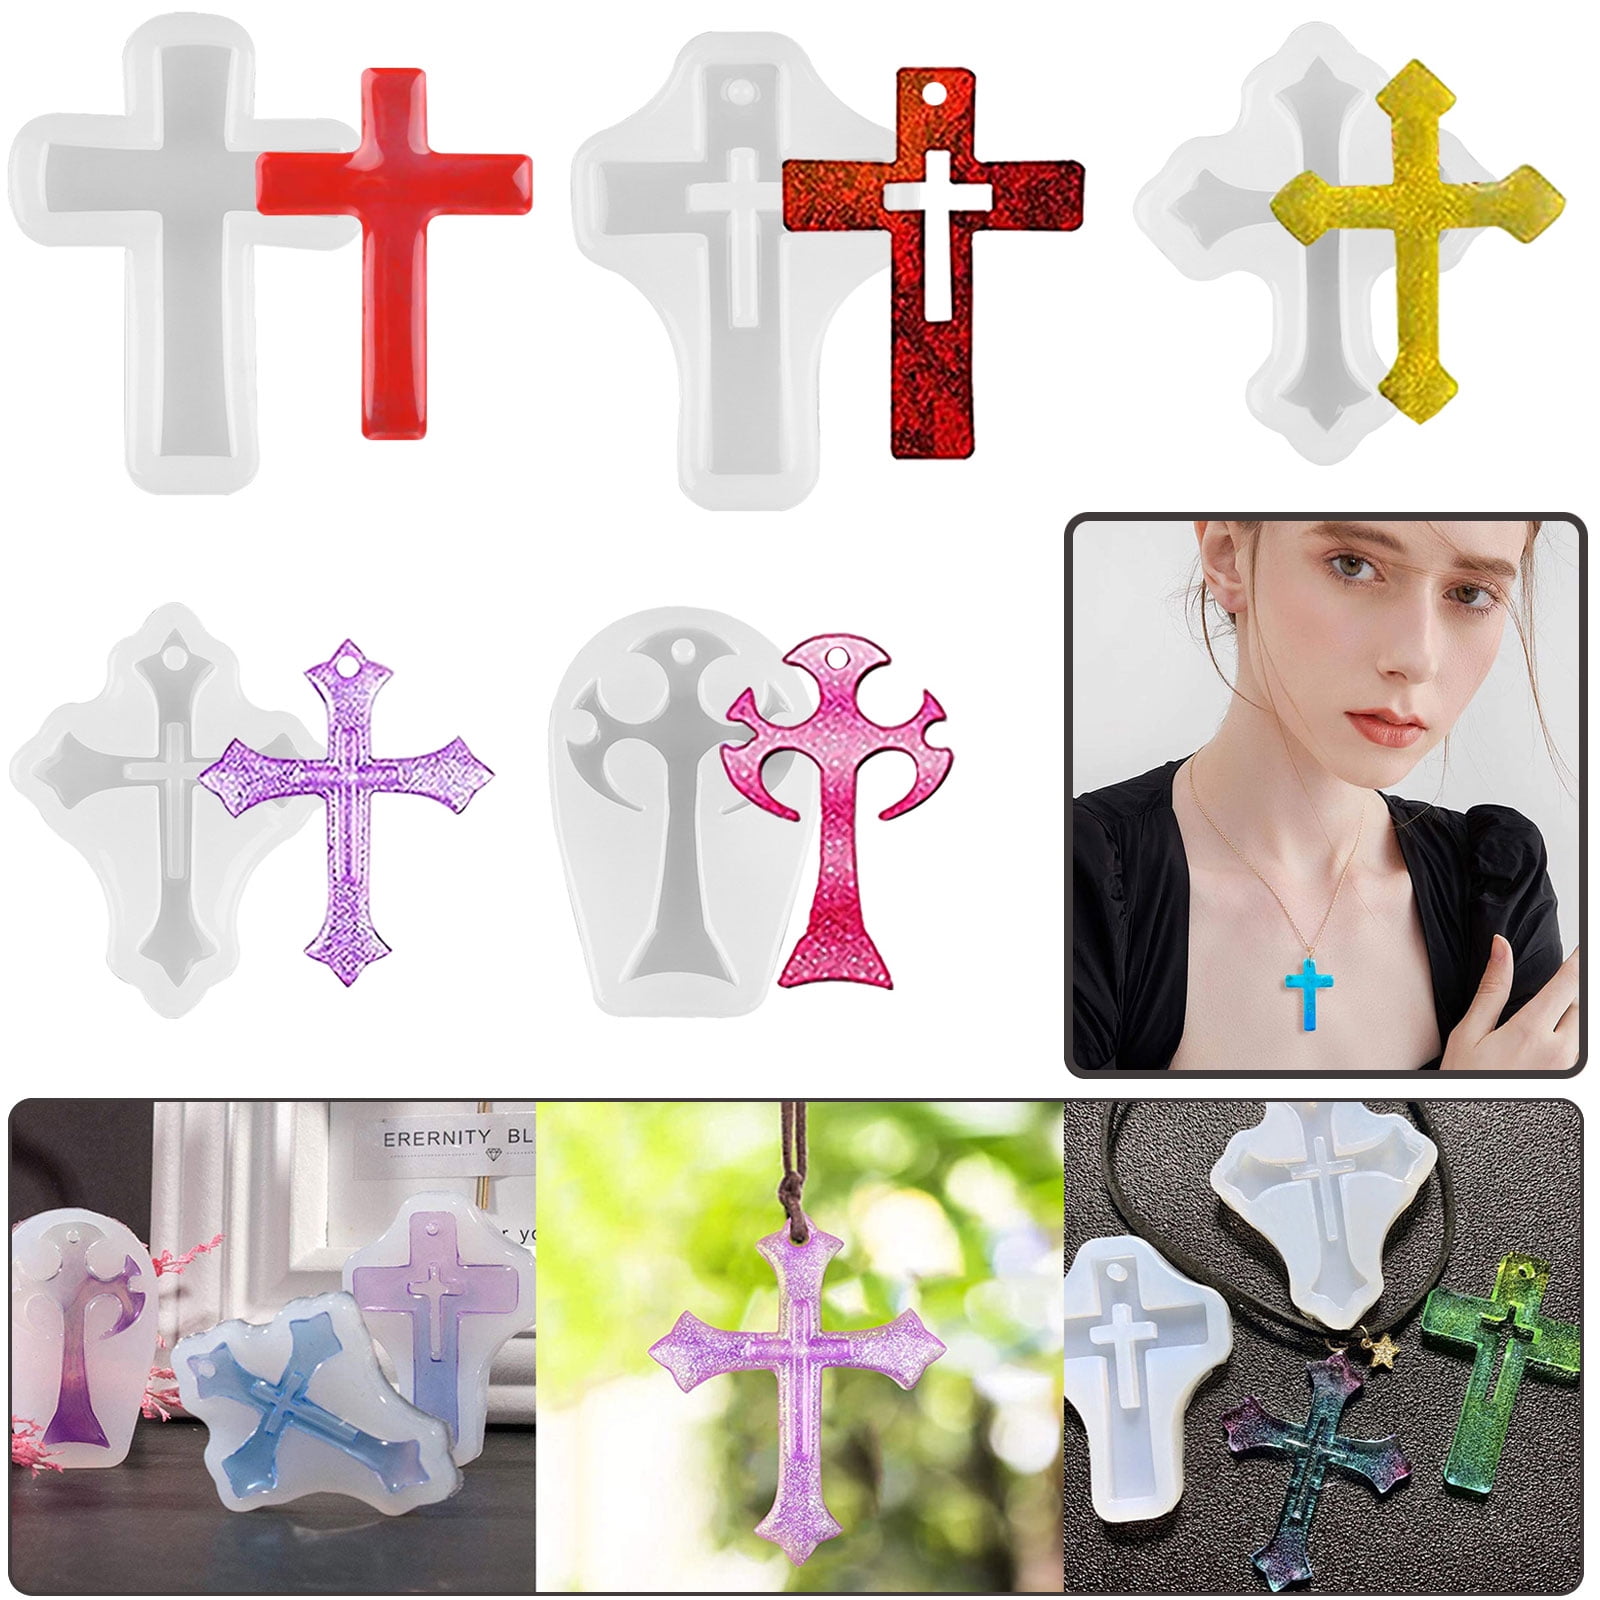 Cross Silicone Resin Molds, 12 Cavity Epoxy Resin Keychain Molds For D�